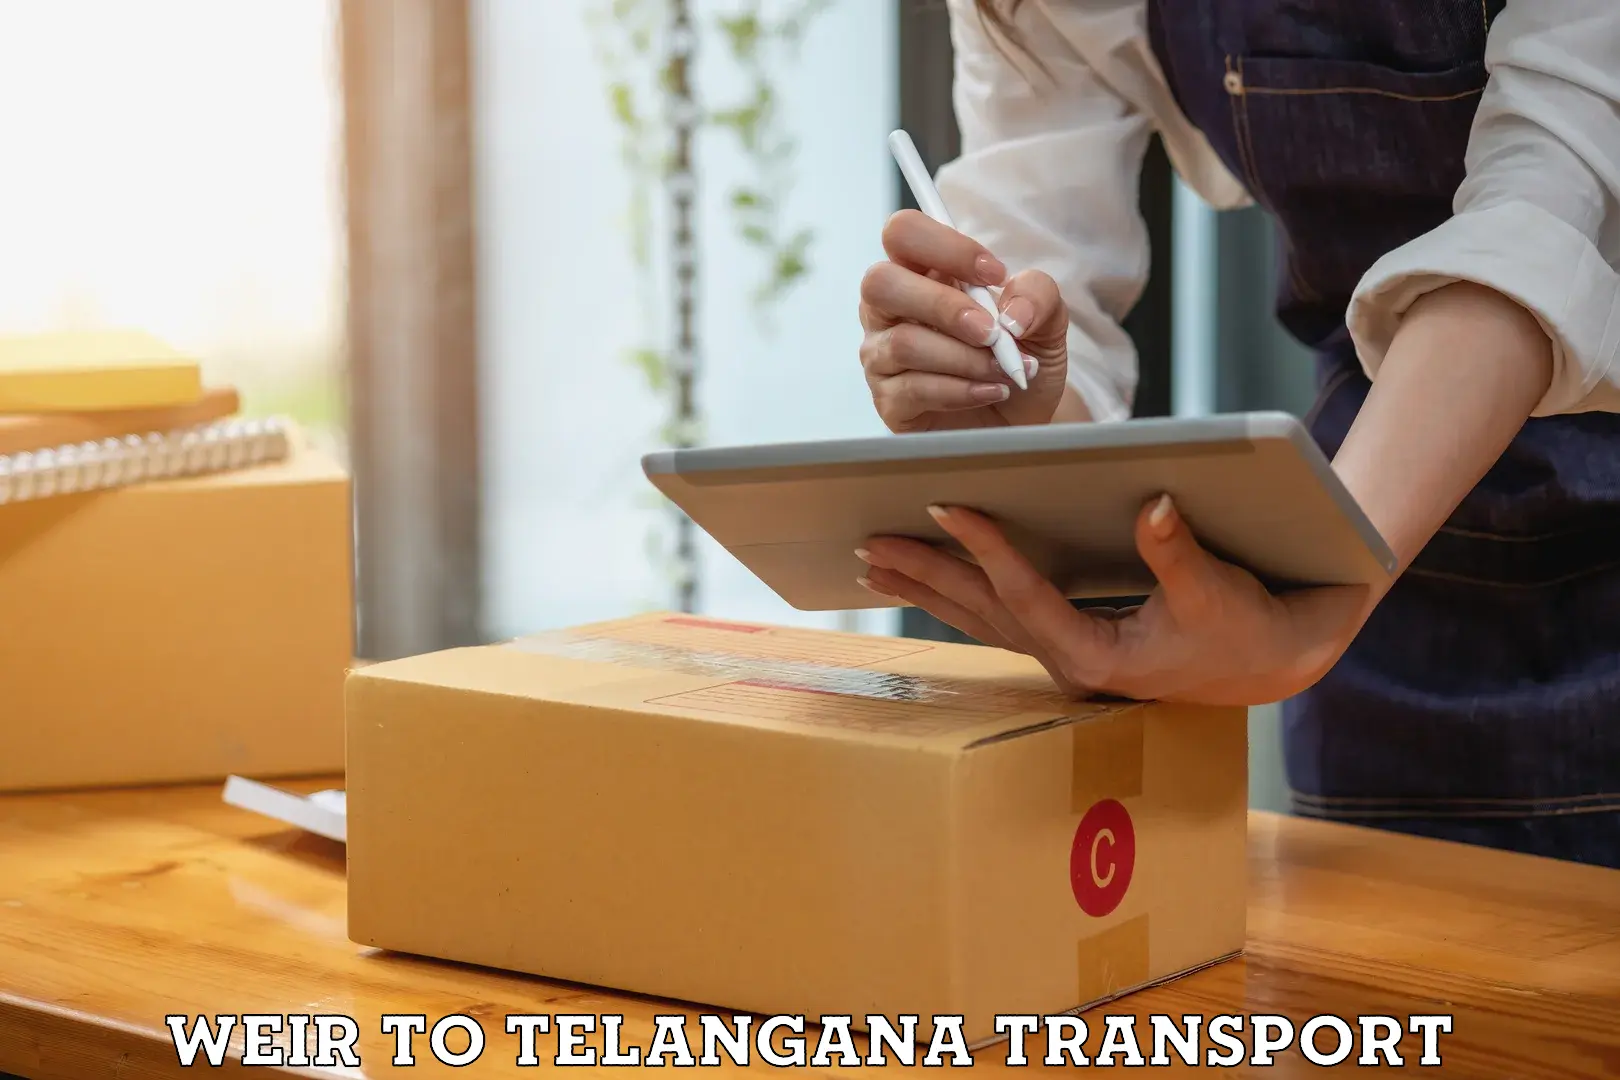 Vehicle transport services Weir to Telangana